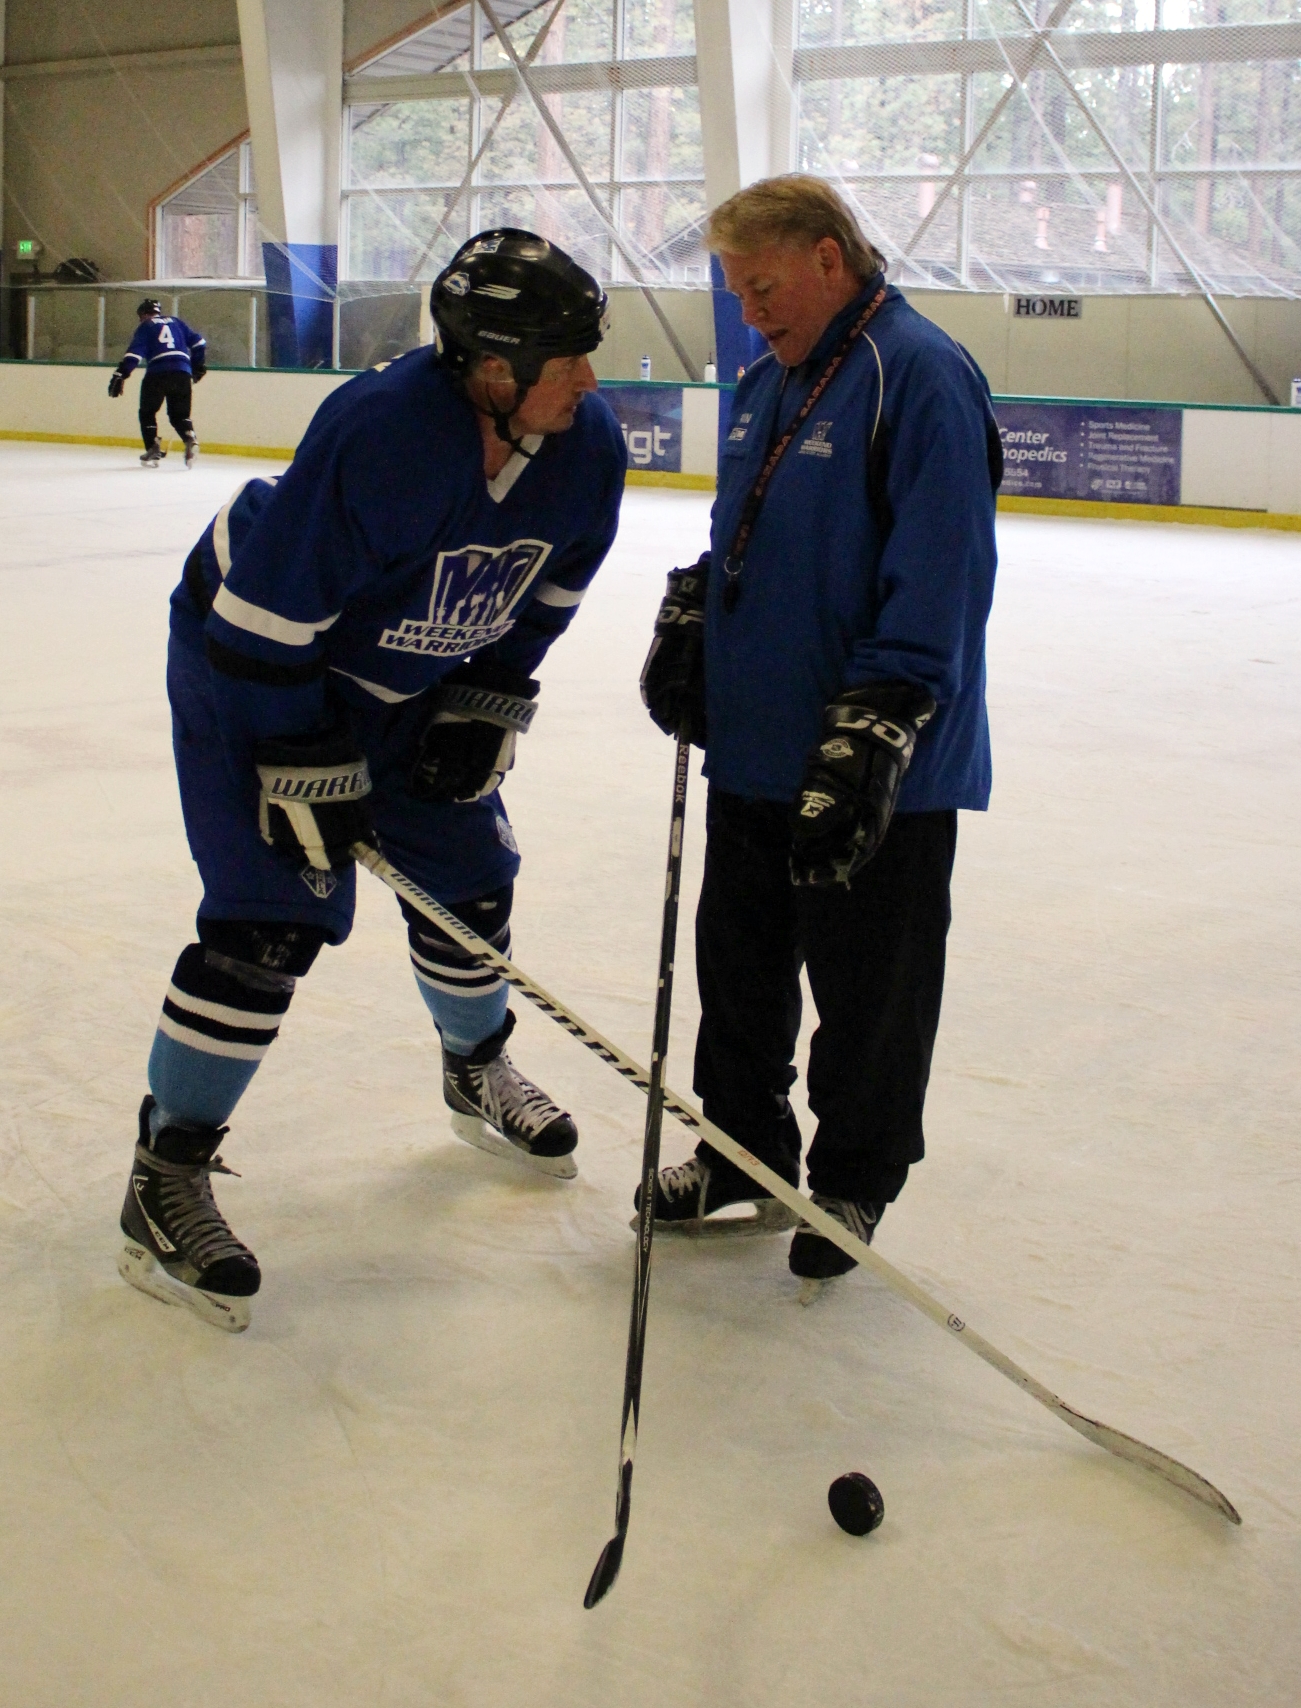 Coach Kevin helps player with wrist shot